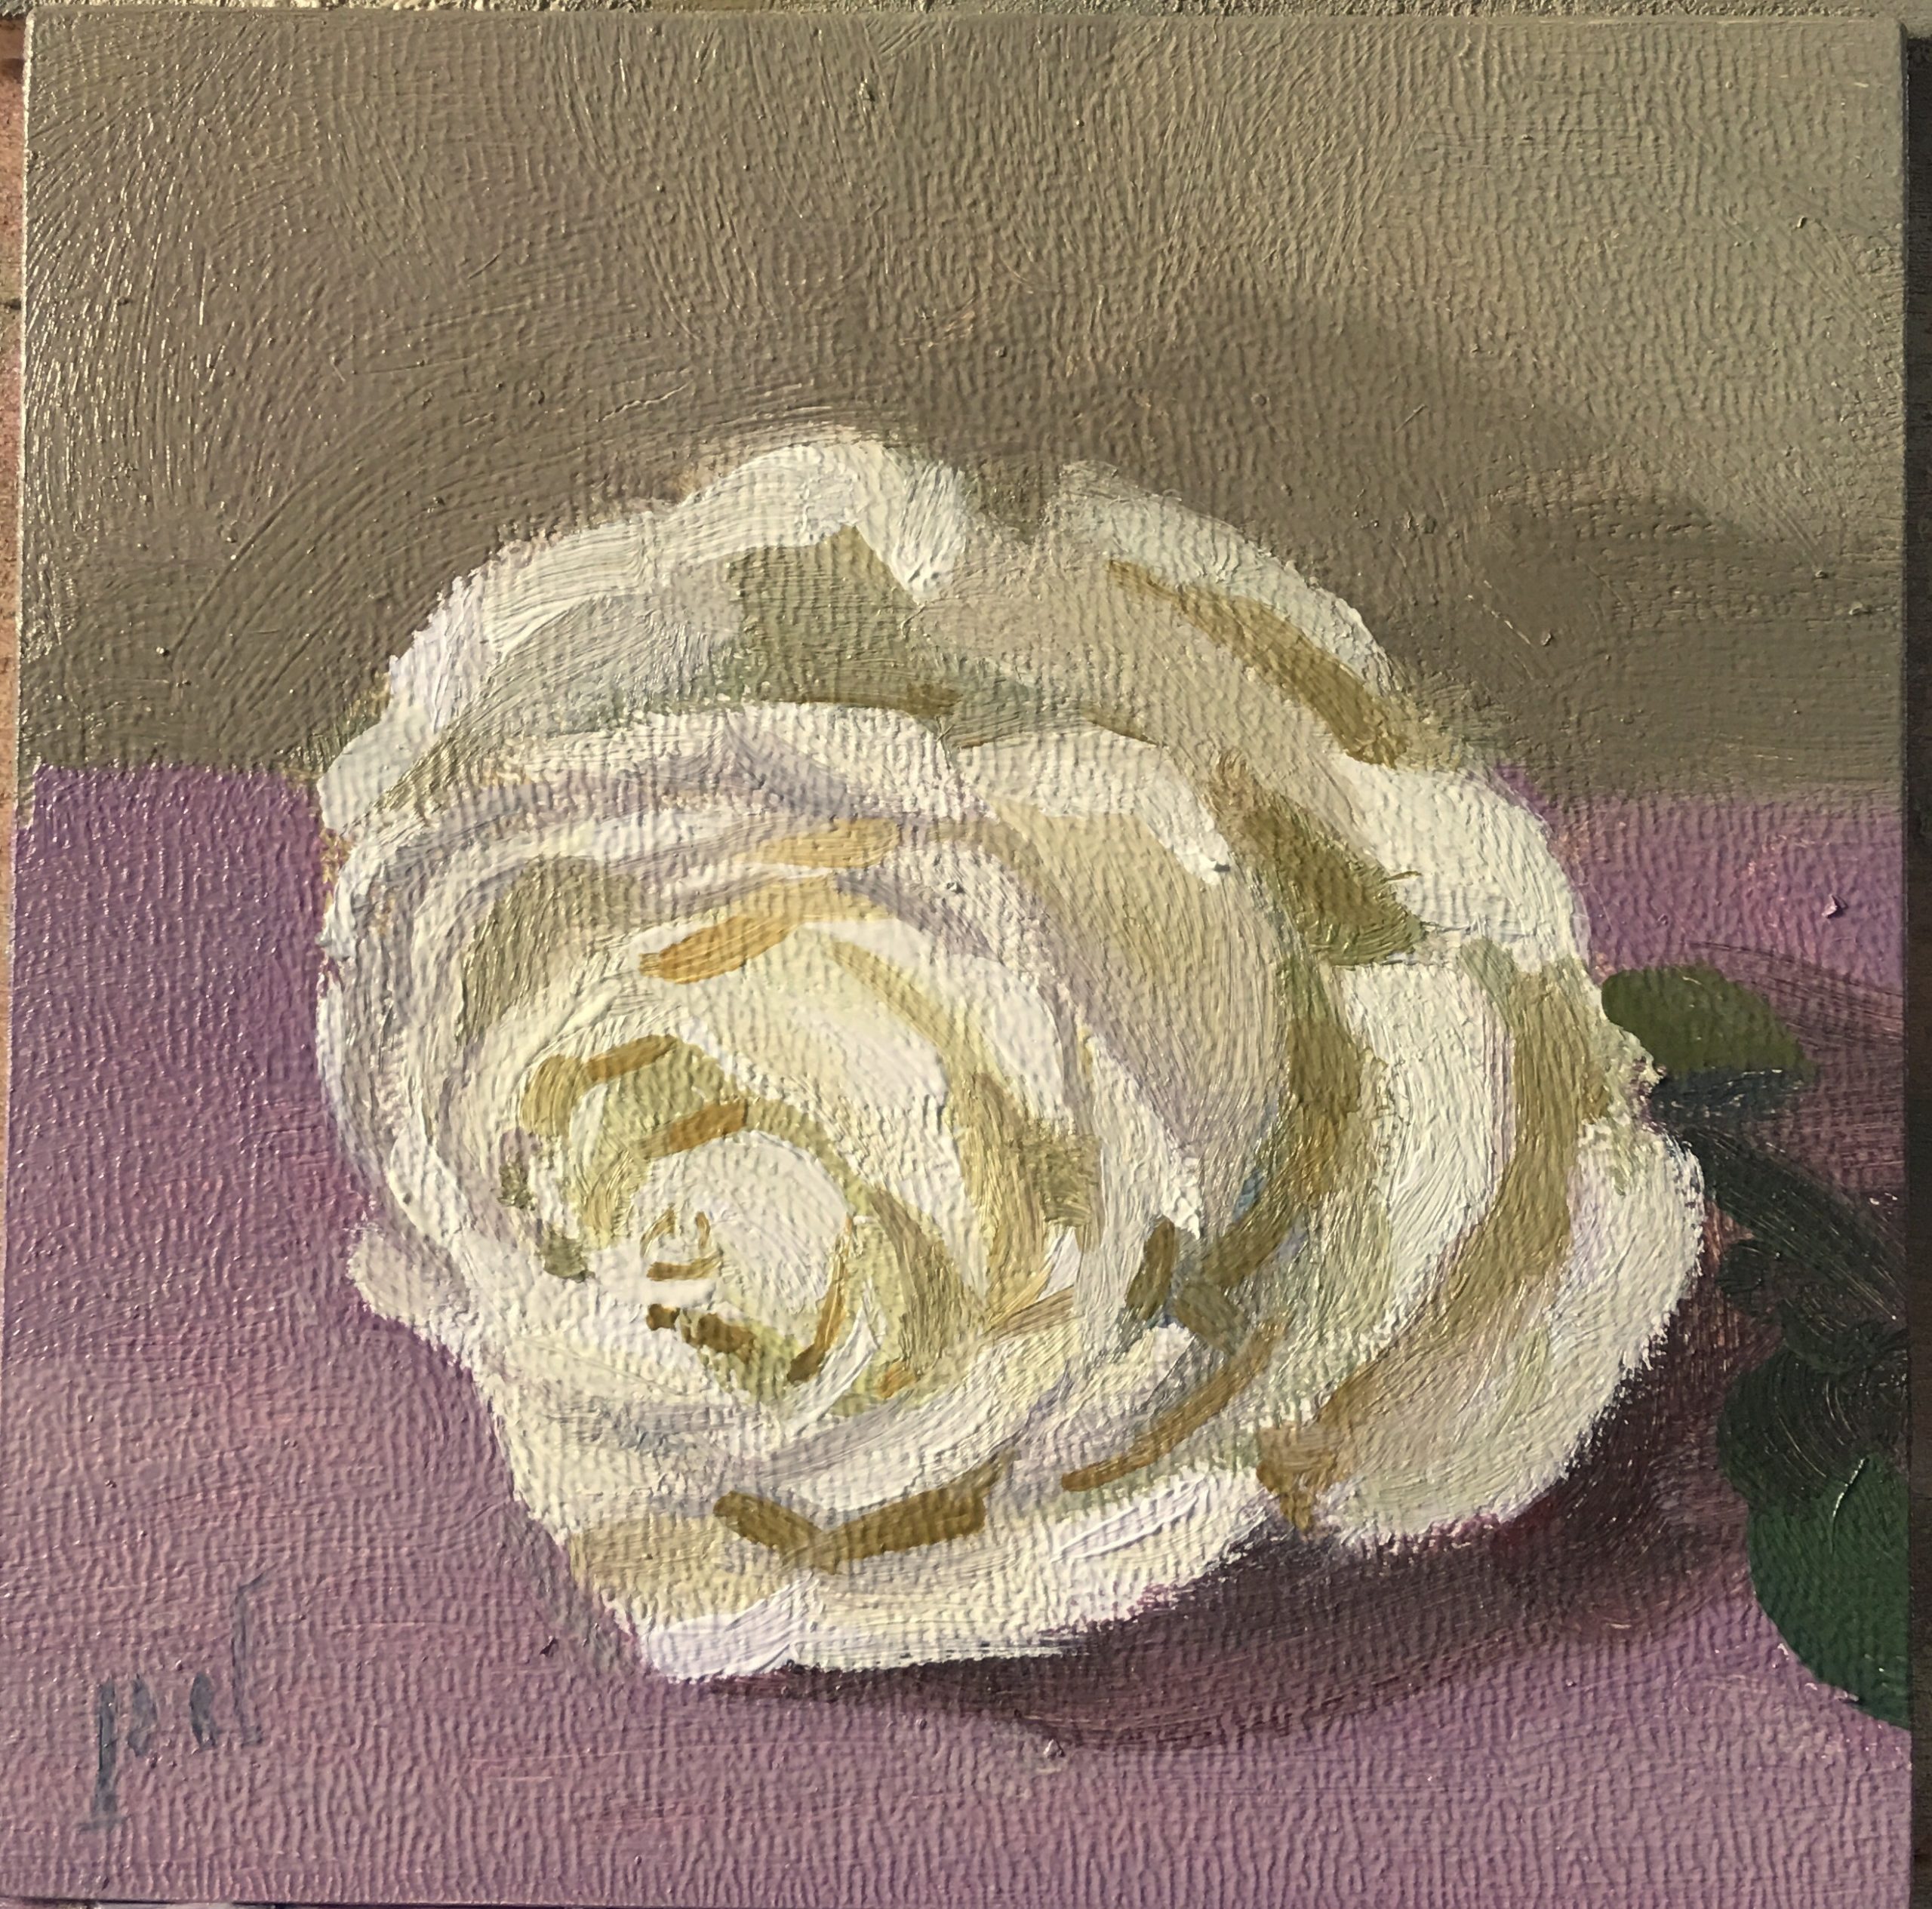 White Rose oil painting copyright 2017 Peter Dickison